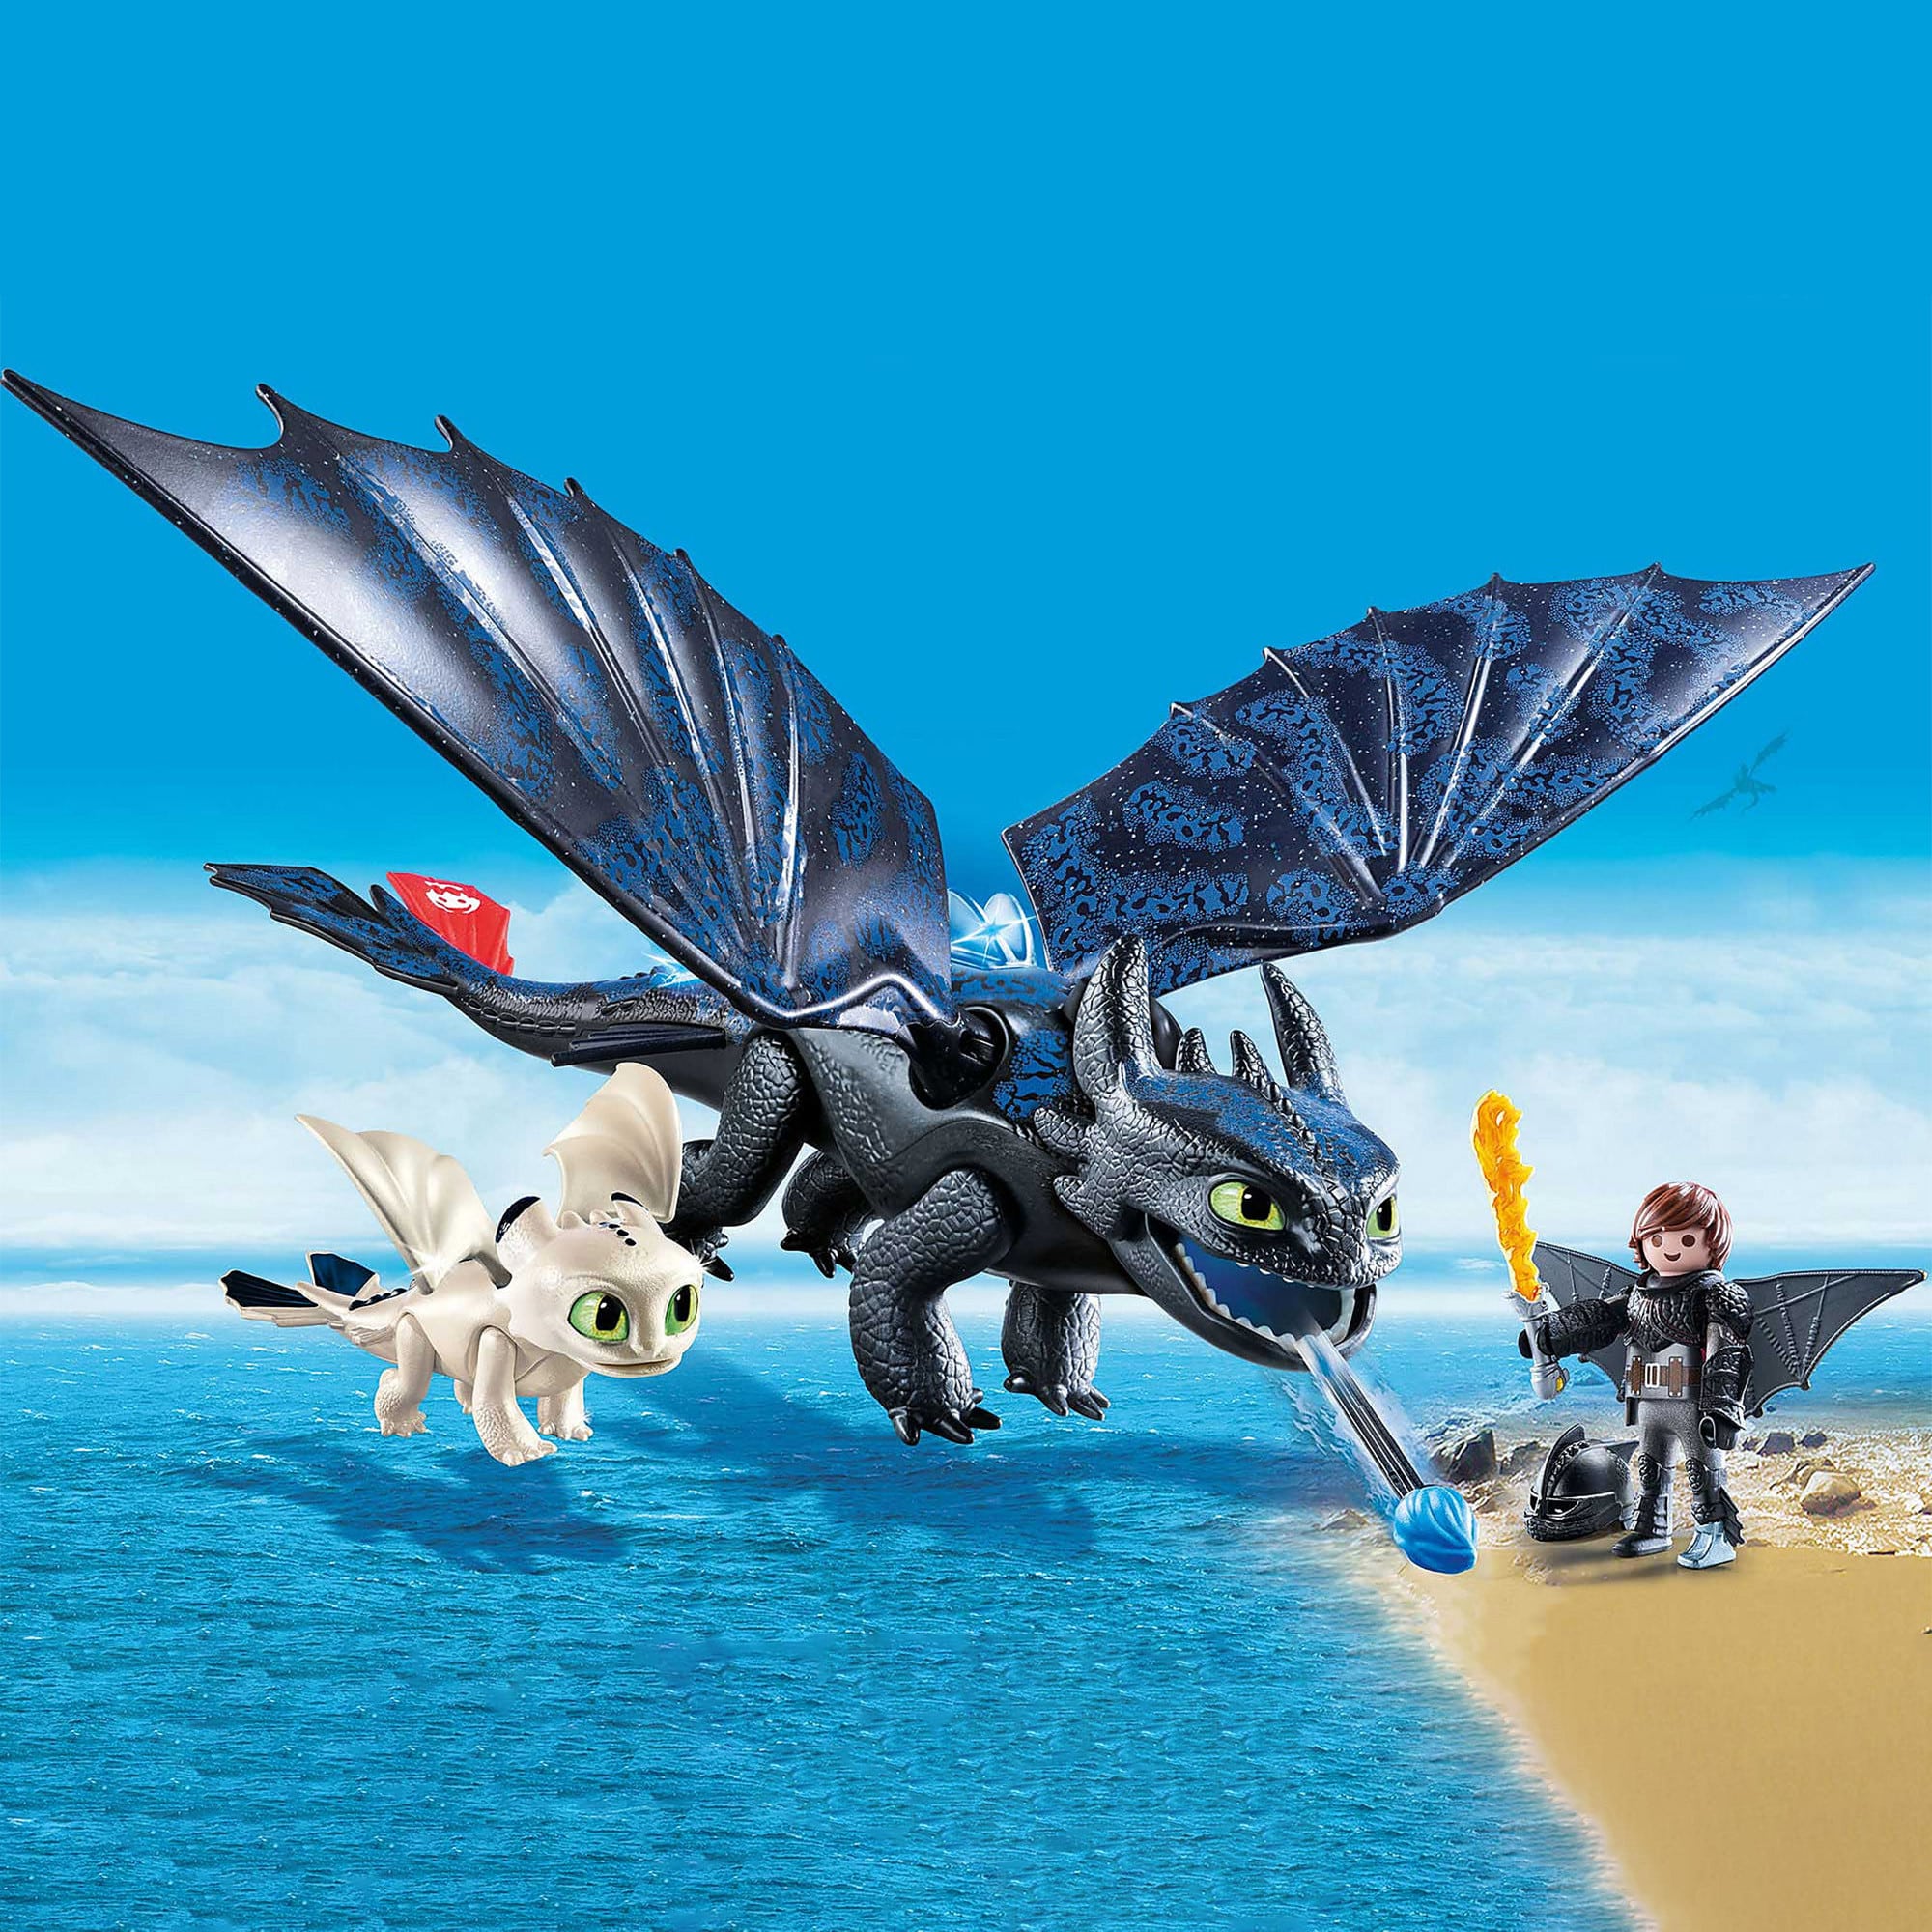 Playmobil - Dragons - Hiccup & Toothless Playset 70037